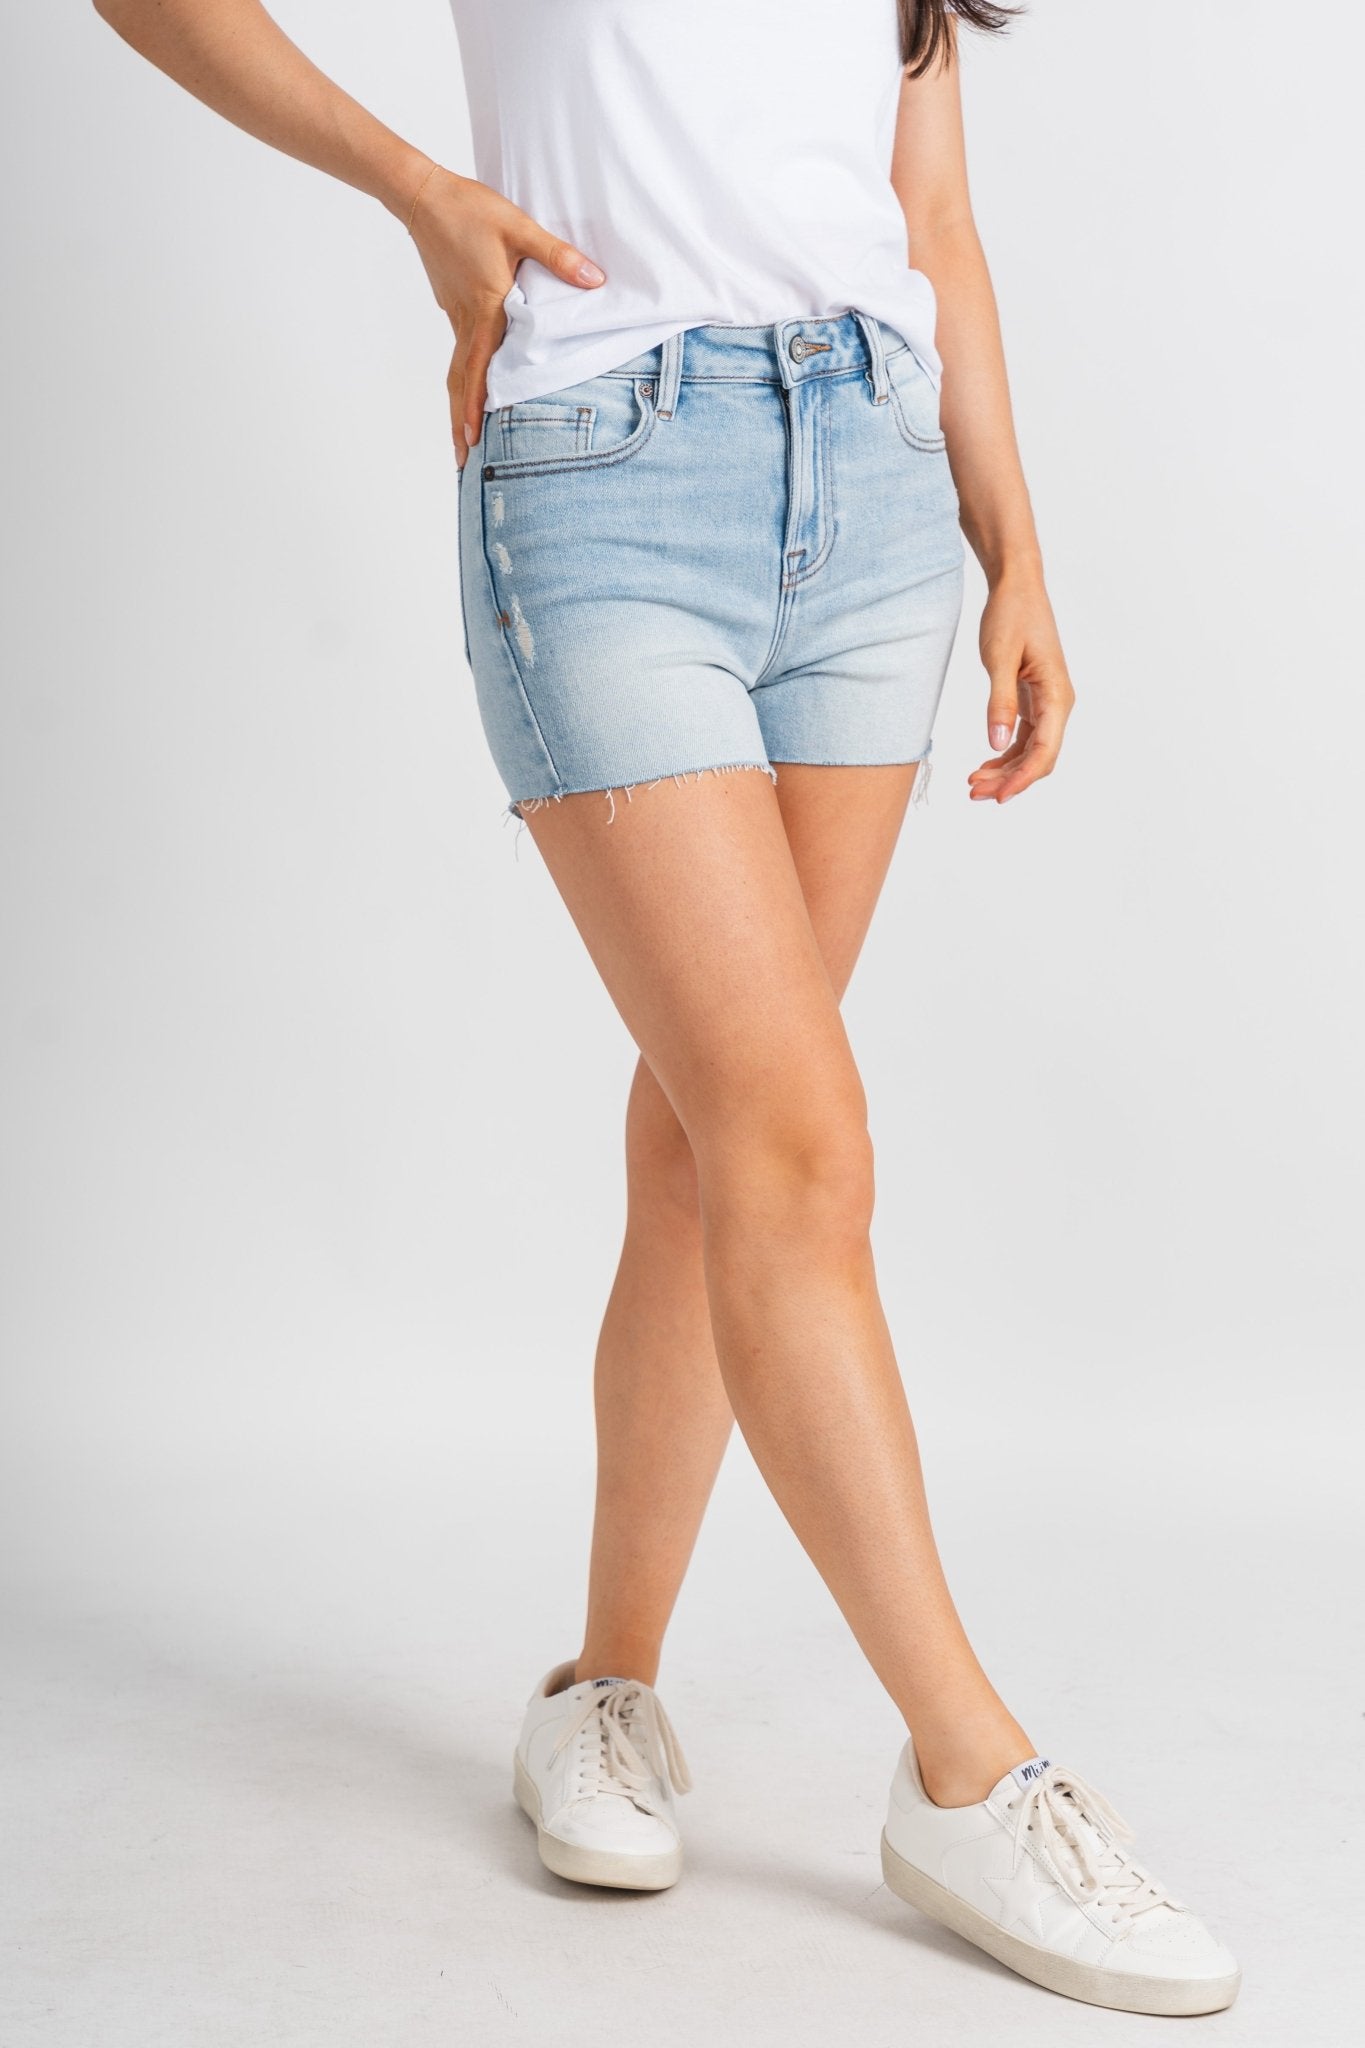 Hidden Kenzie mid right denim shorts medium light - Stylish Shorts - Trendy Staycation Outfits at Lush Fashion Lounge Boutique in Oklahoma City